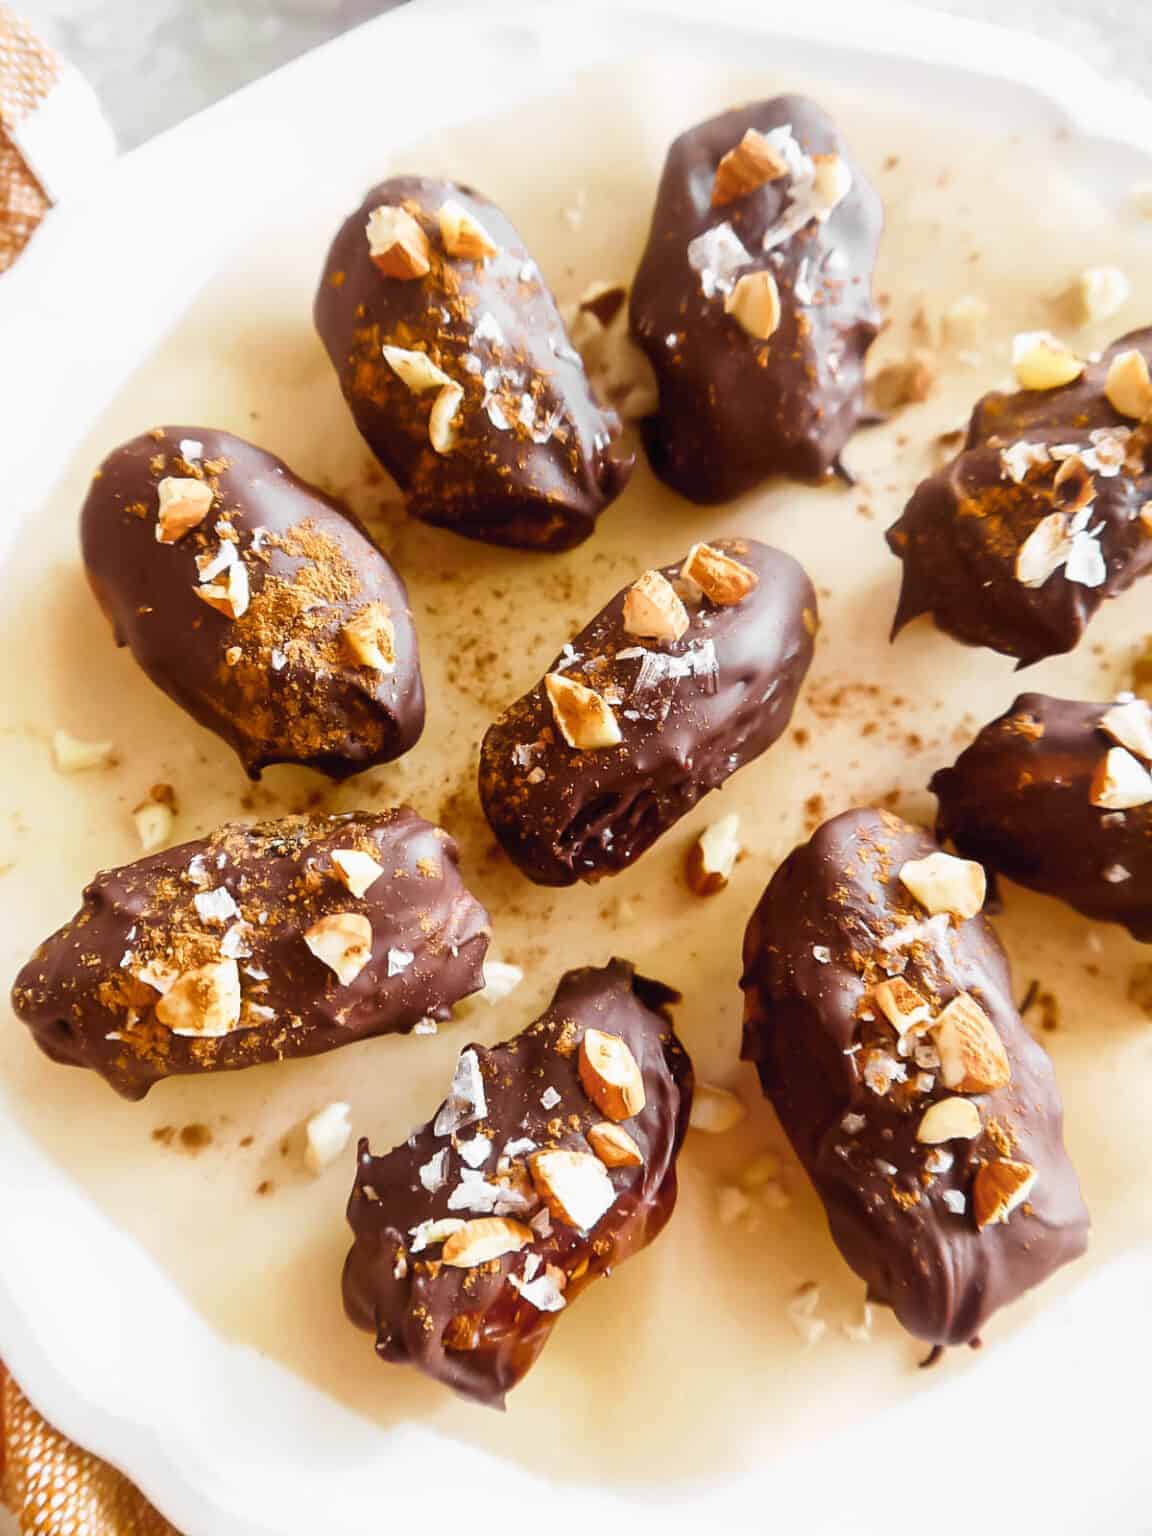 A plate with paleo chocolate-covered dates topped with crushed almonds.